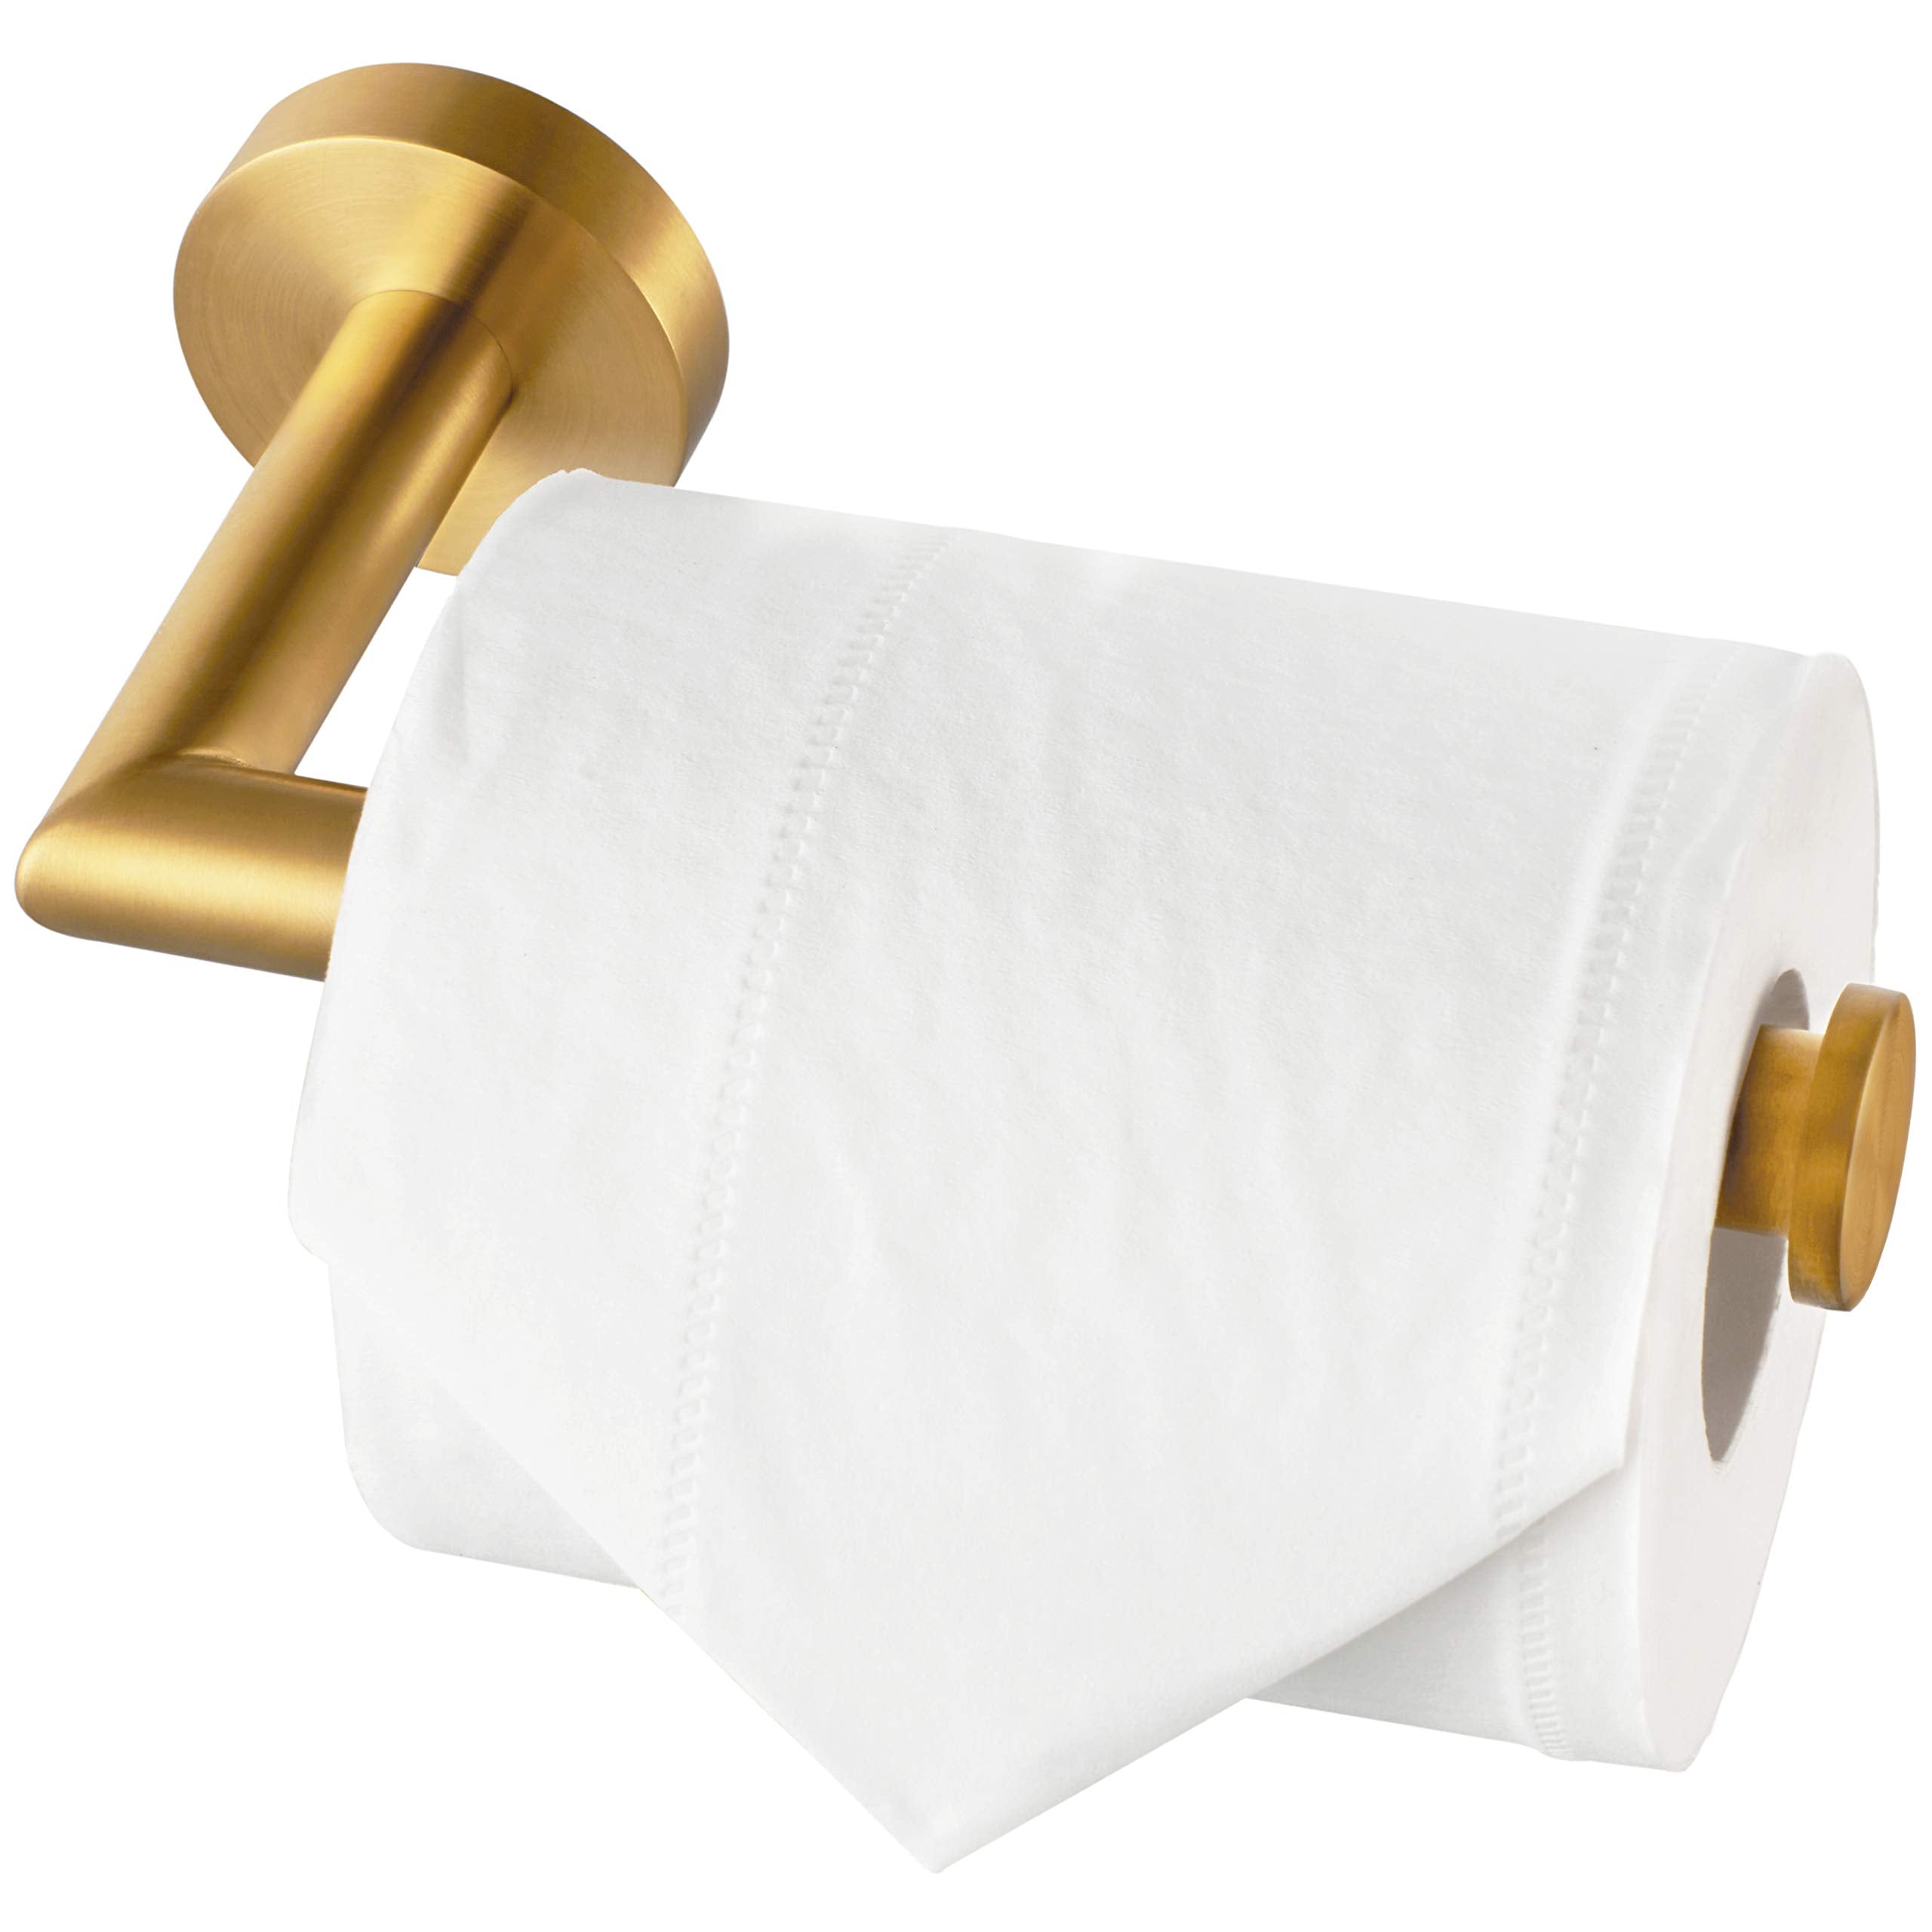 toilet-paper-holder-wall-mount-stainless-steel-round-toilet-paper-roll-holder-bathroom-brushed-brass 1